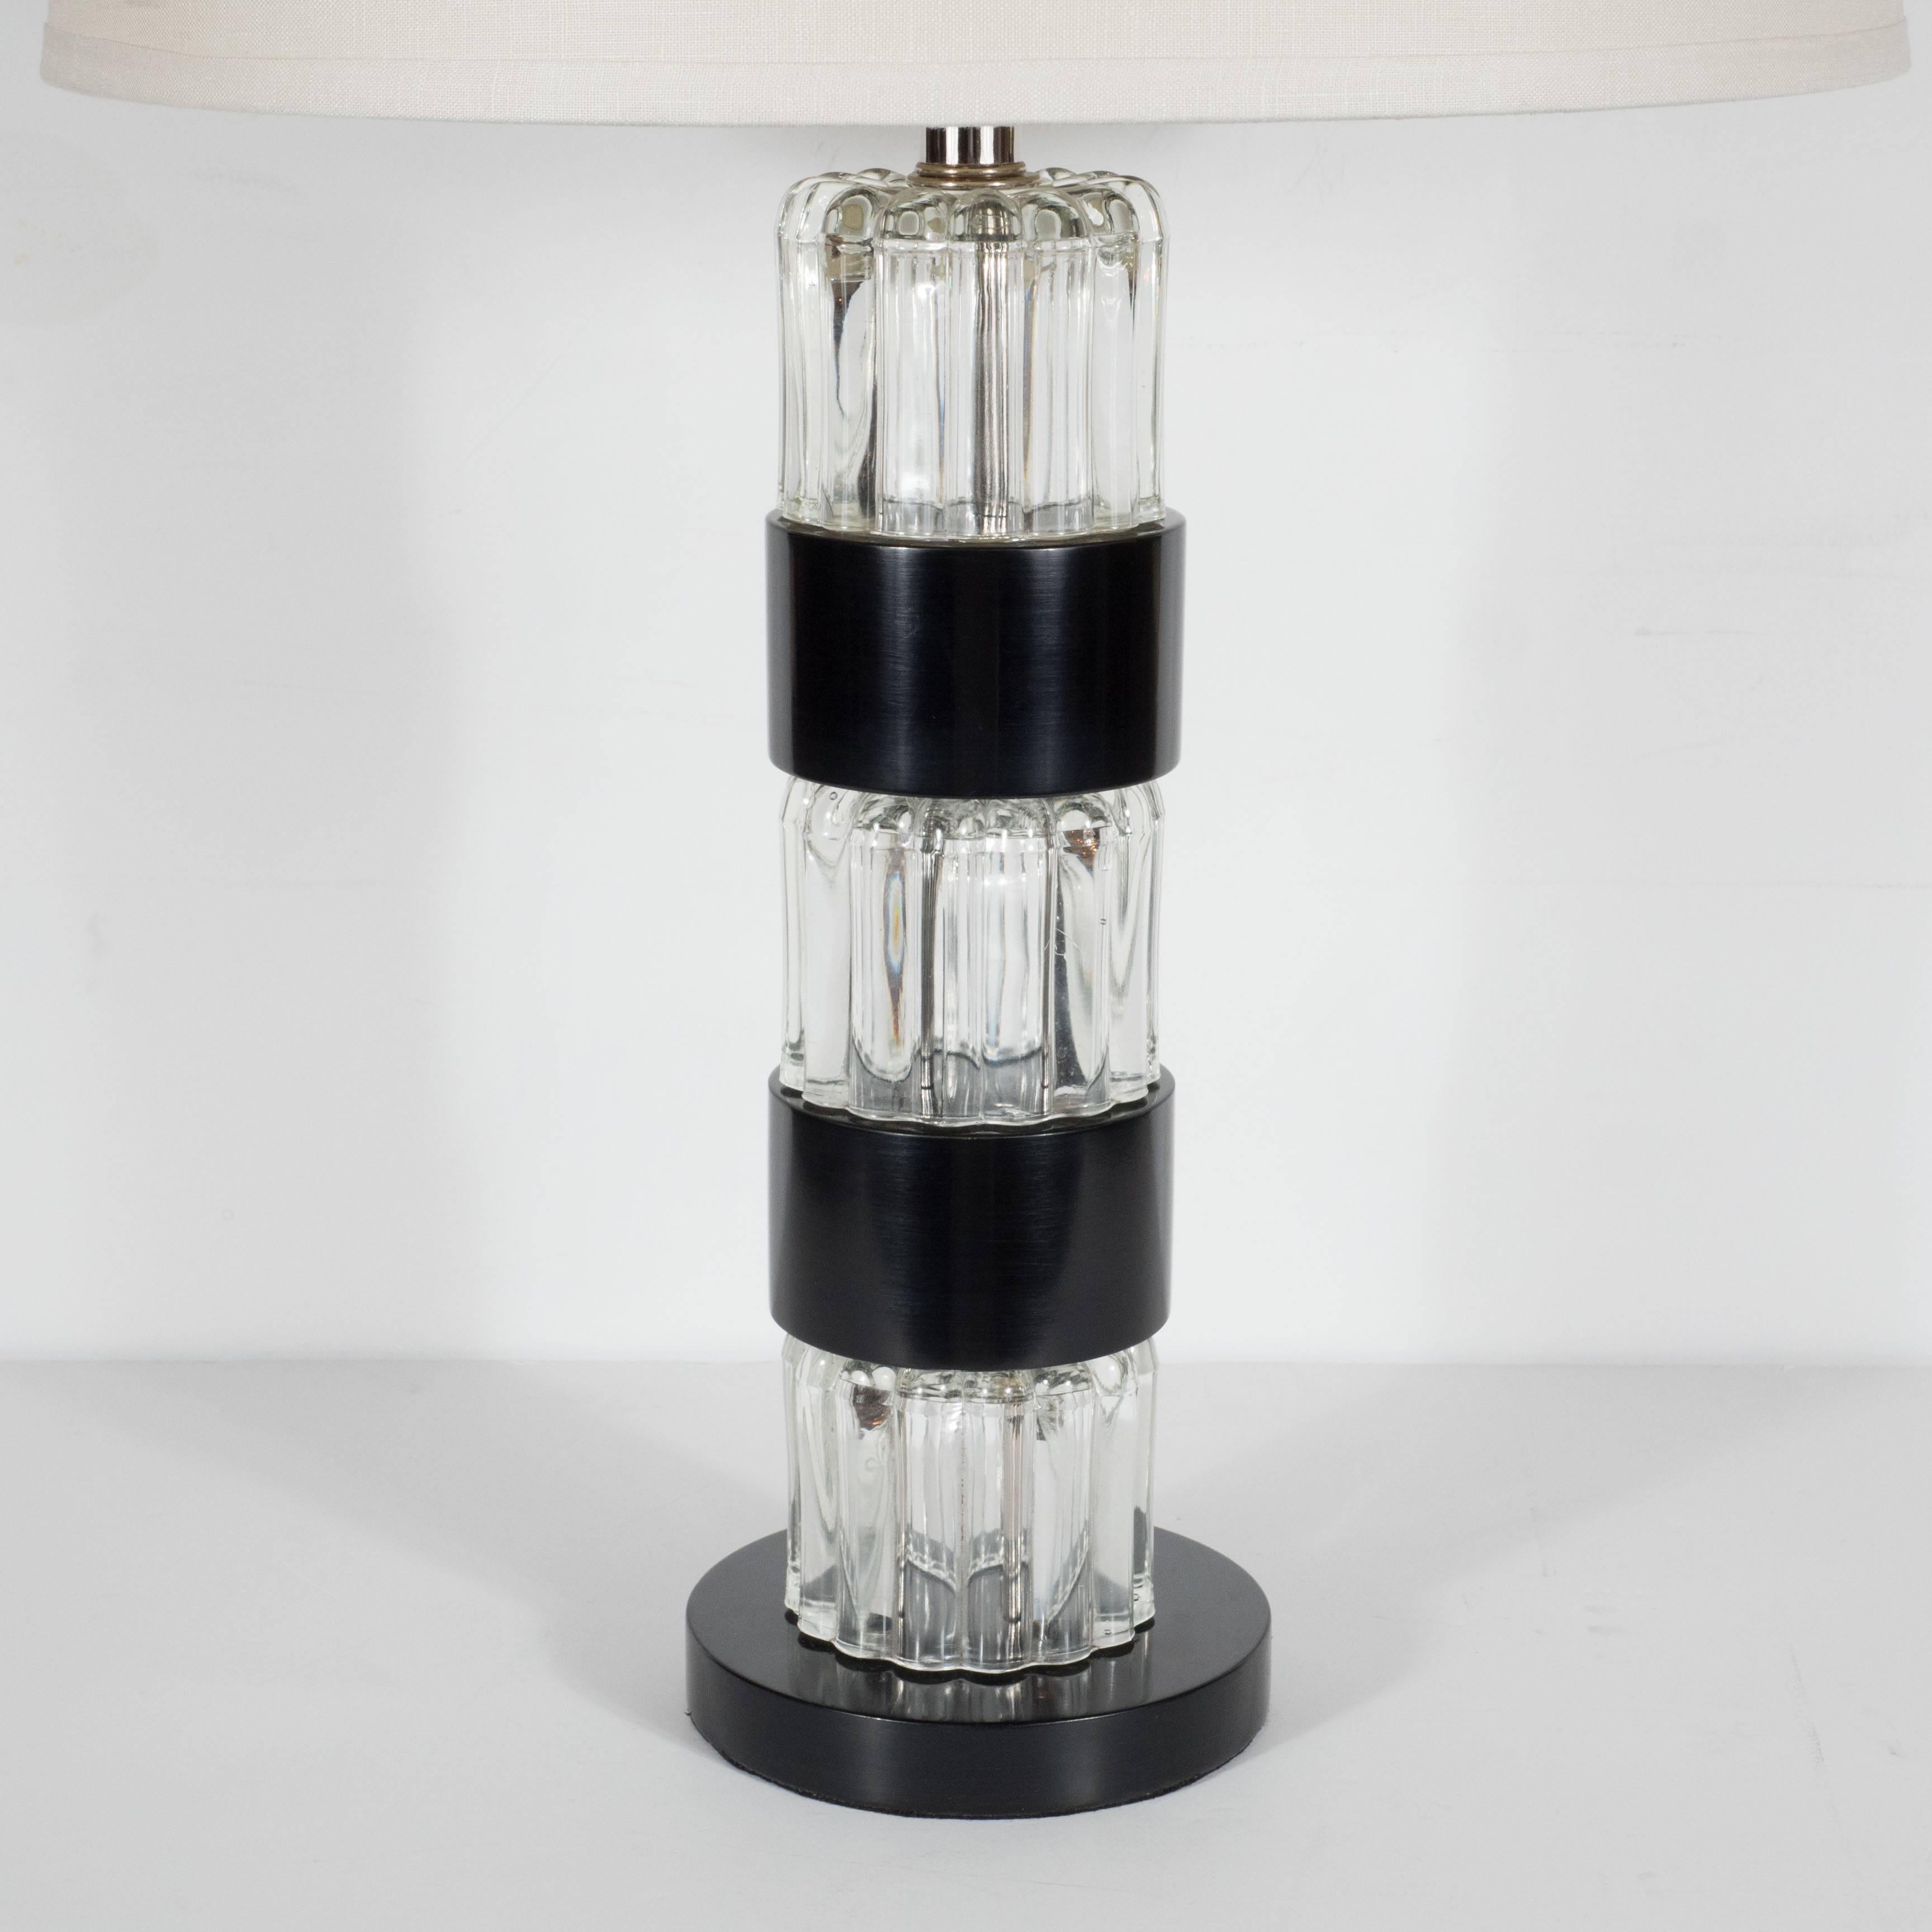 Striking Mid-Century Modern pair of table lamps by Russel Wright, attractively designed with bands of ebonized walnut separating the circular glass base itself which is composed of pressed glass creating an interesting transparent pattern. The base